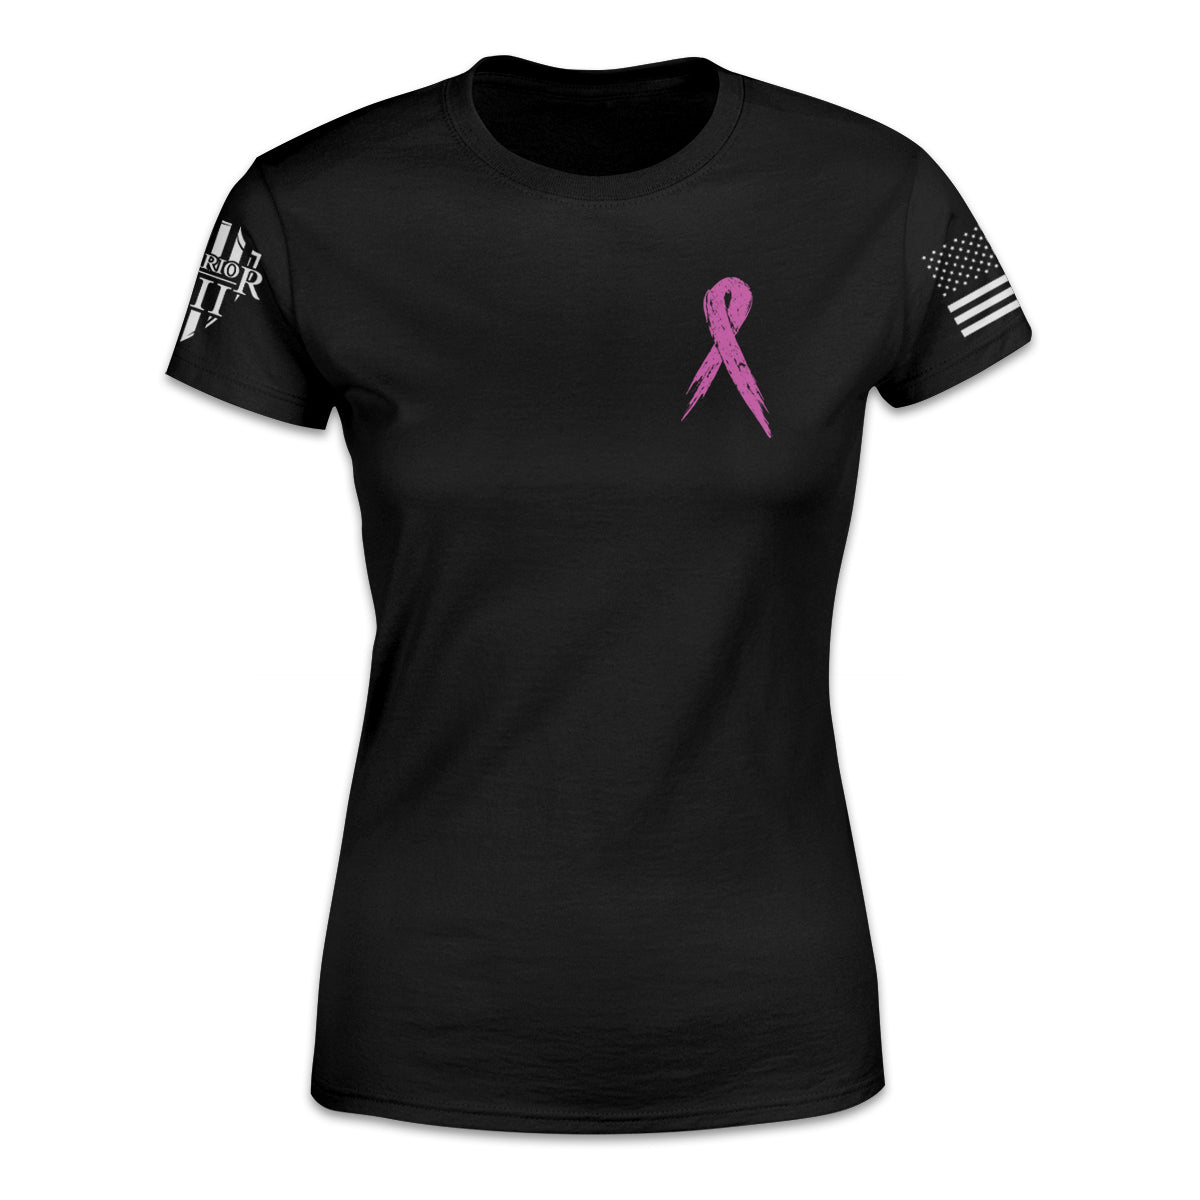 Women's black t-shirt with the pink ribbon for breast cancer awareness.